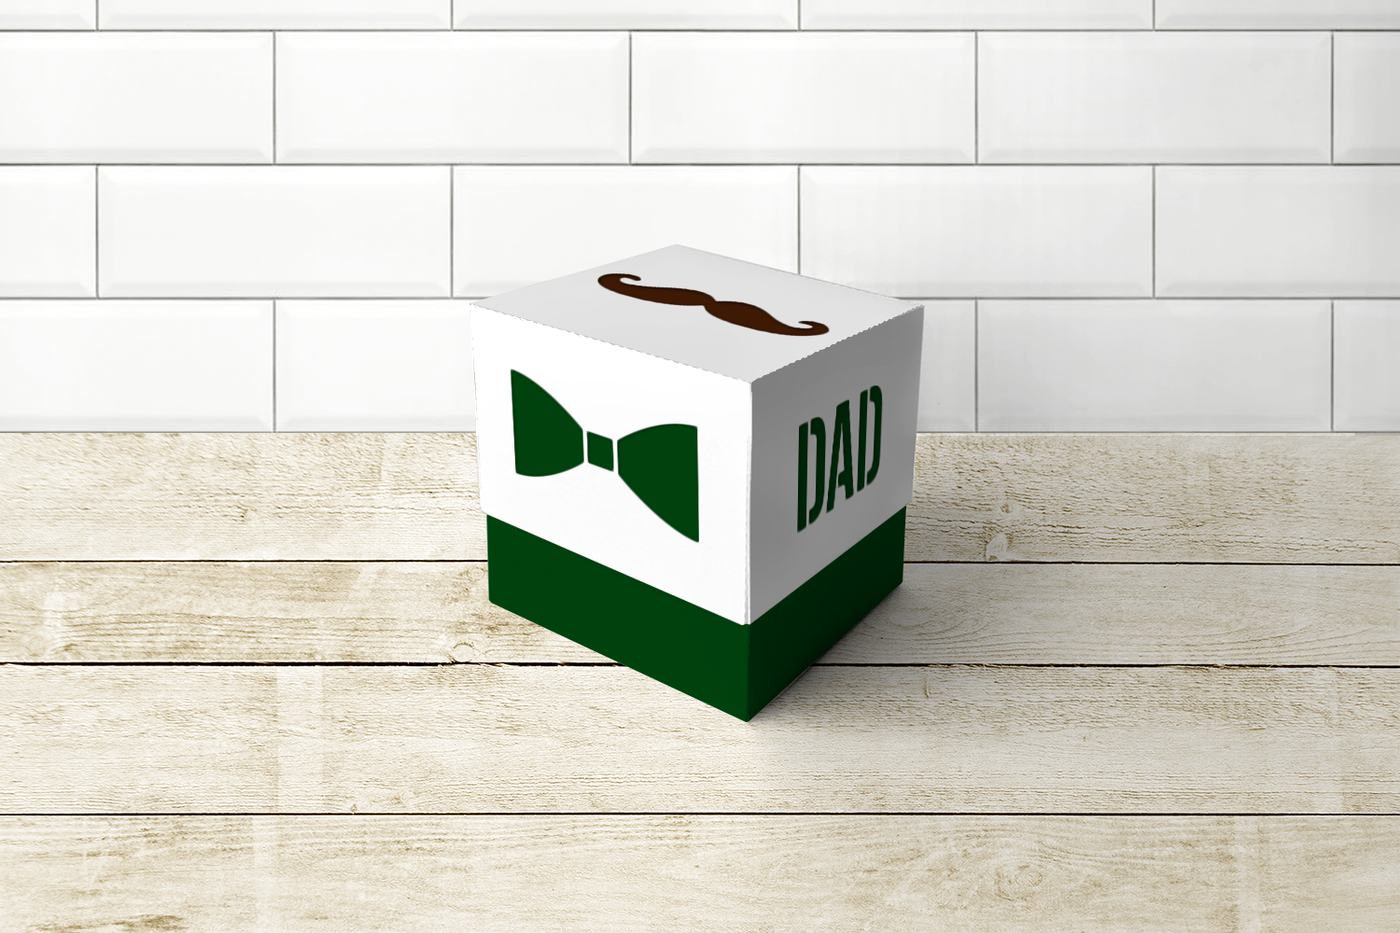 Gift box SVG design with mustache, bow tie, and DAD cutouts.